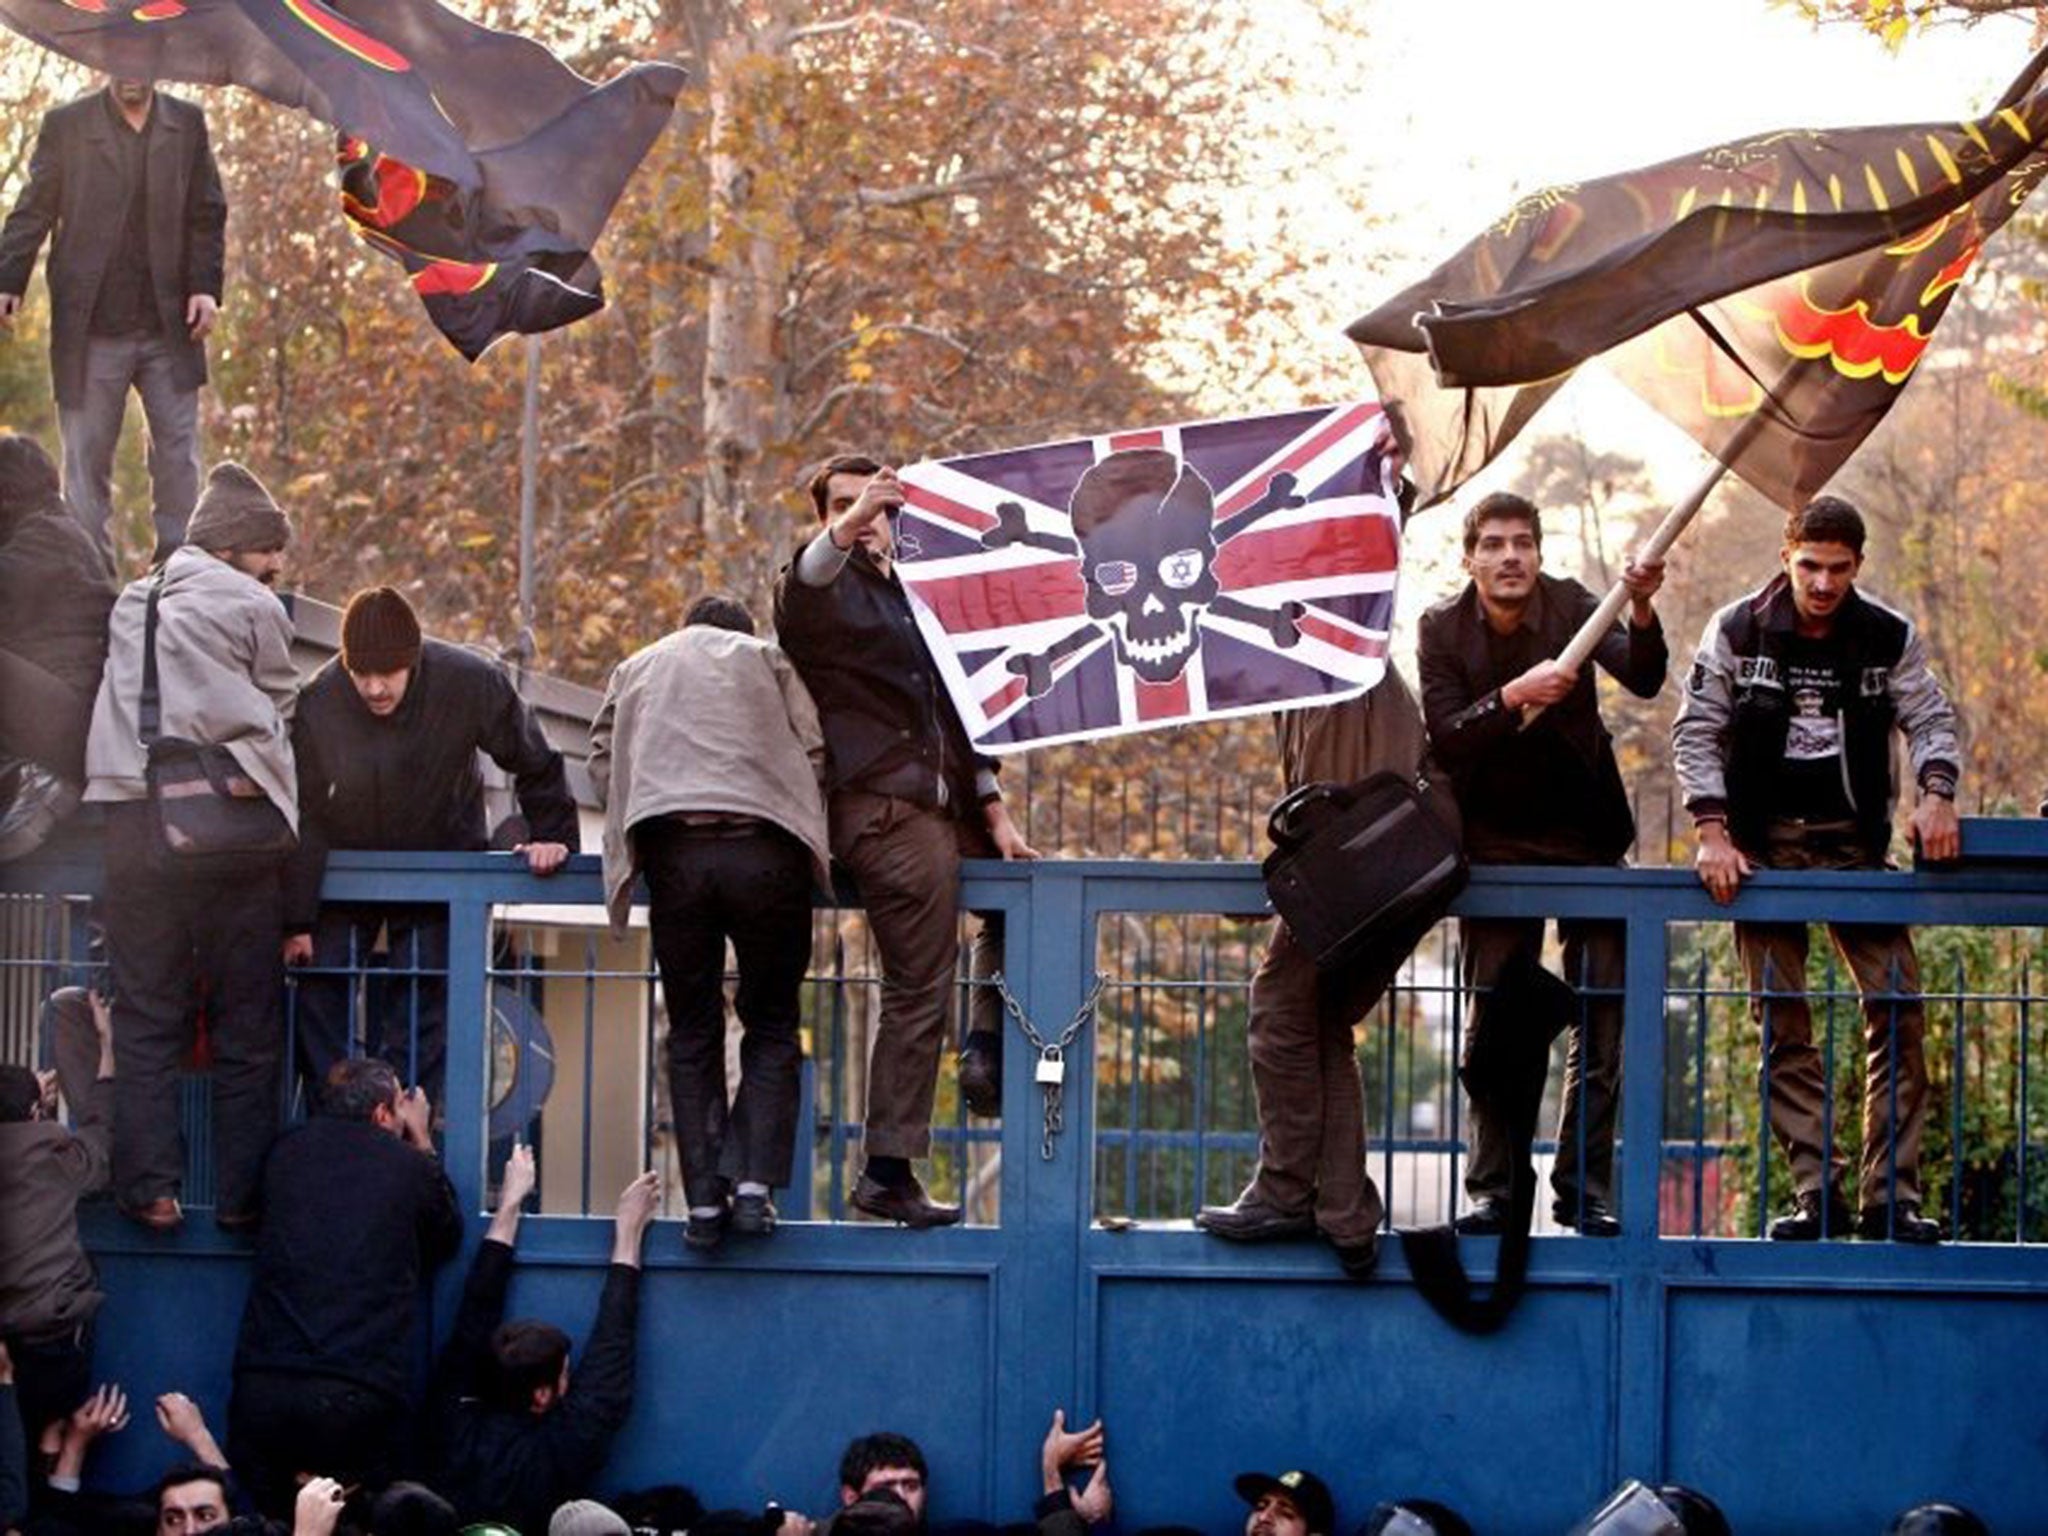 Flashback to November 2011 when hundreds of Iranian students broke into the British embassy in Tehran, which is now due to reopen